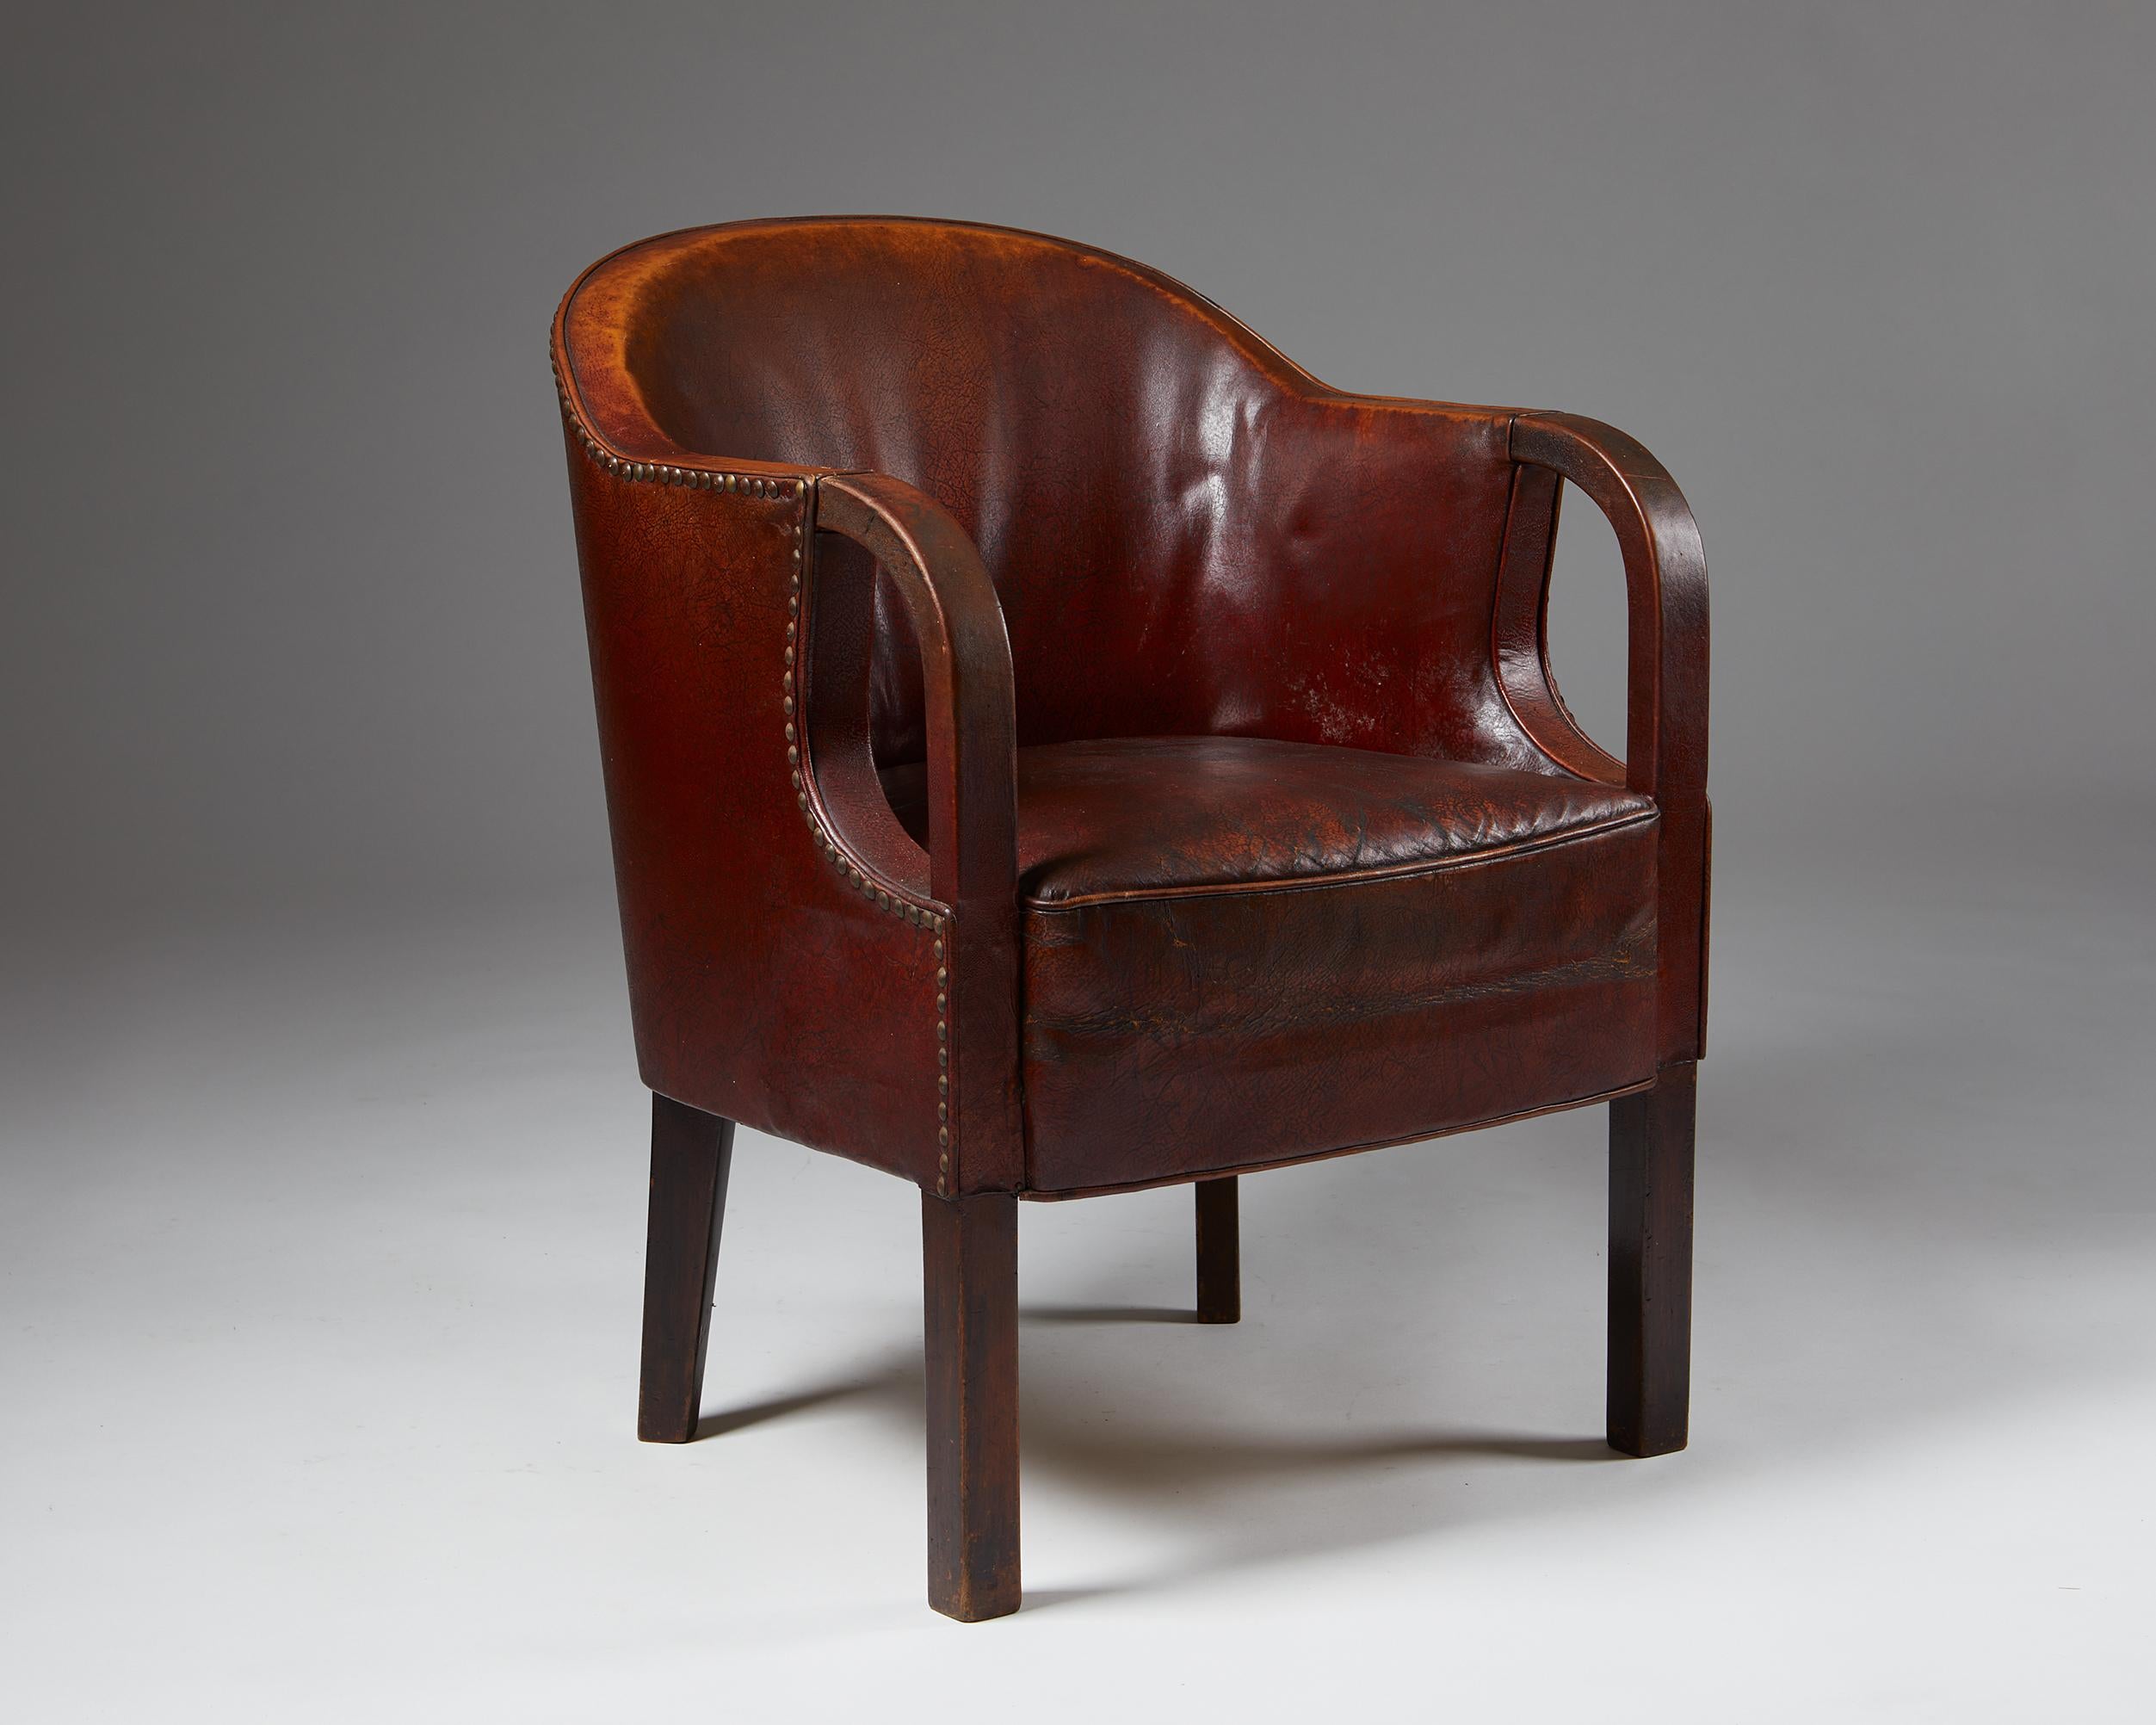 Lounge chair, designed by Kay Fisker,
Denmark, 1930’s.

Mahogany frame and brown leather.

Measurements:
H: 83 cm / 2' 8 3/4